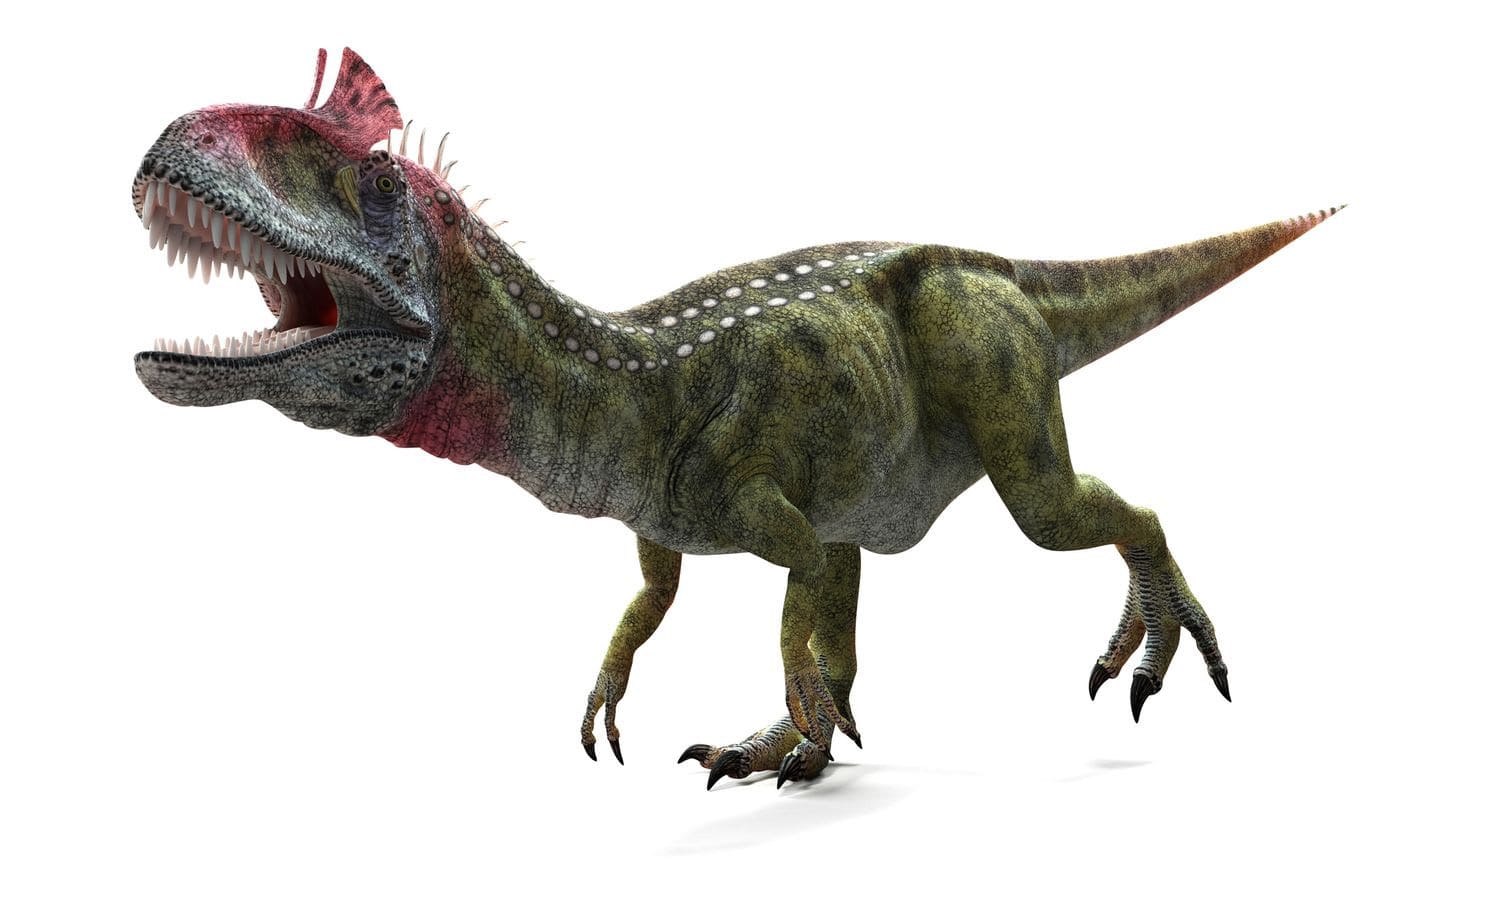 25 interesting facts about Cryolophosaurus